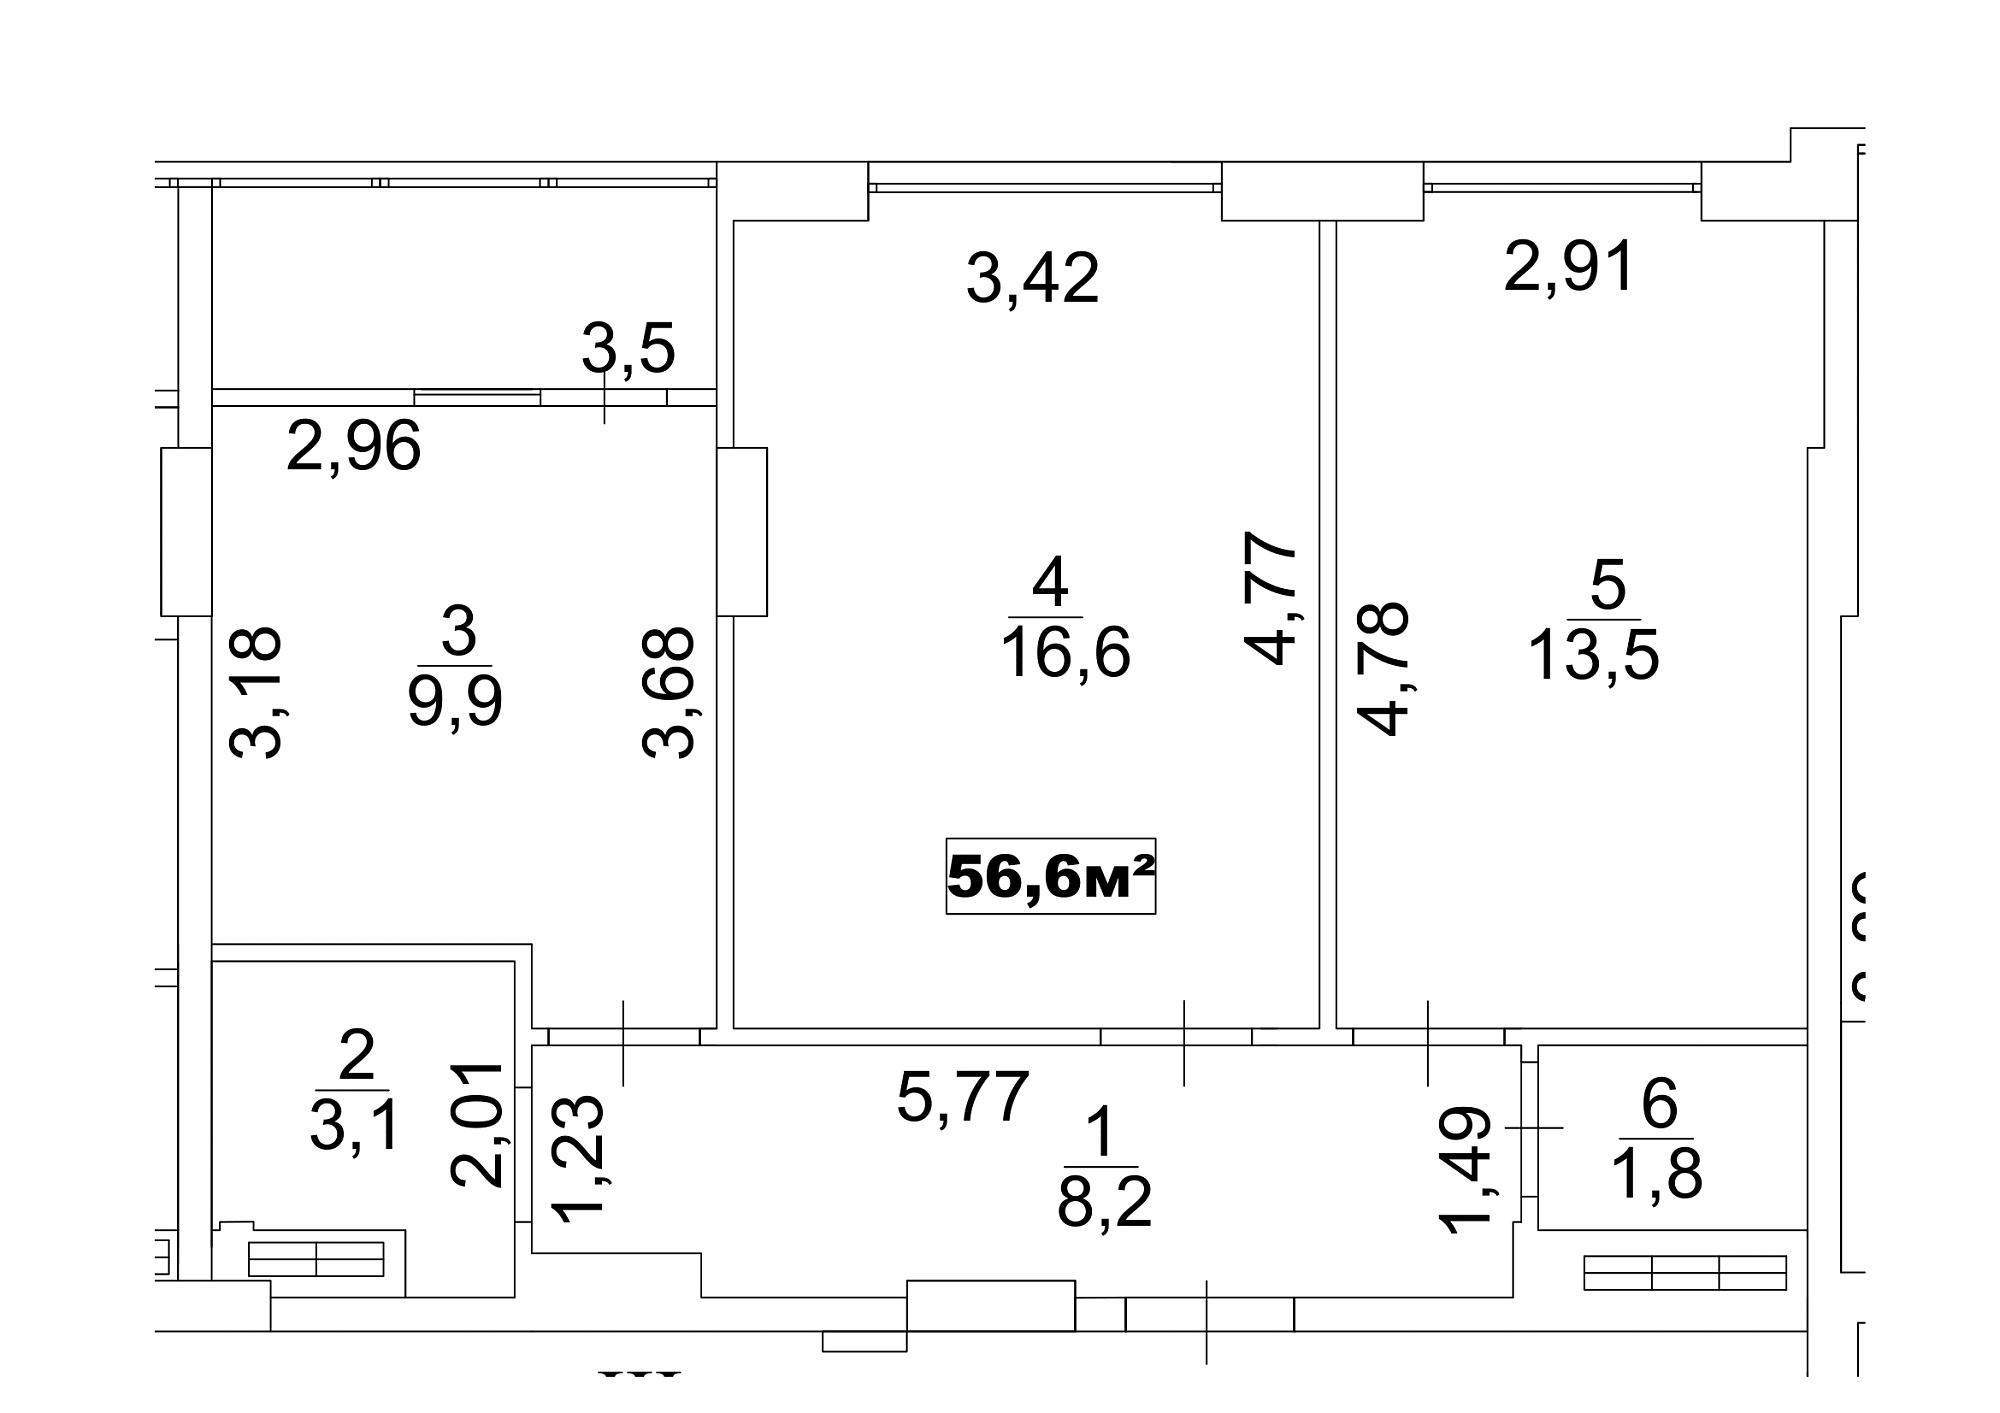 Planning 2-rm flats area 56.6m2, AB-13-03/00019.